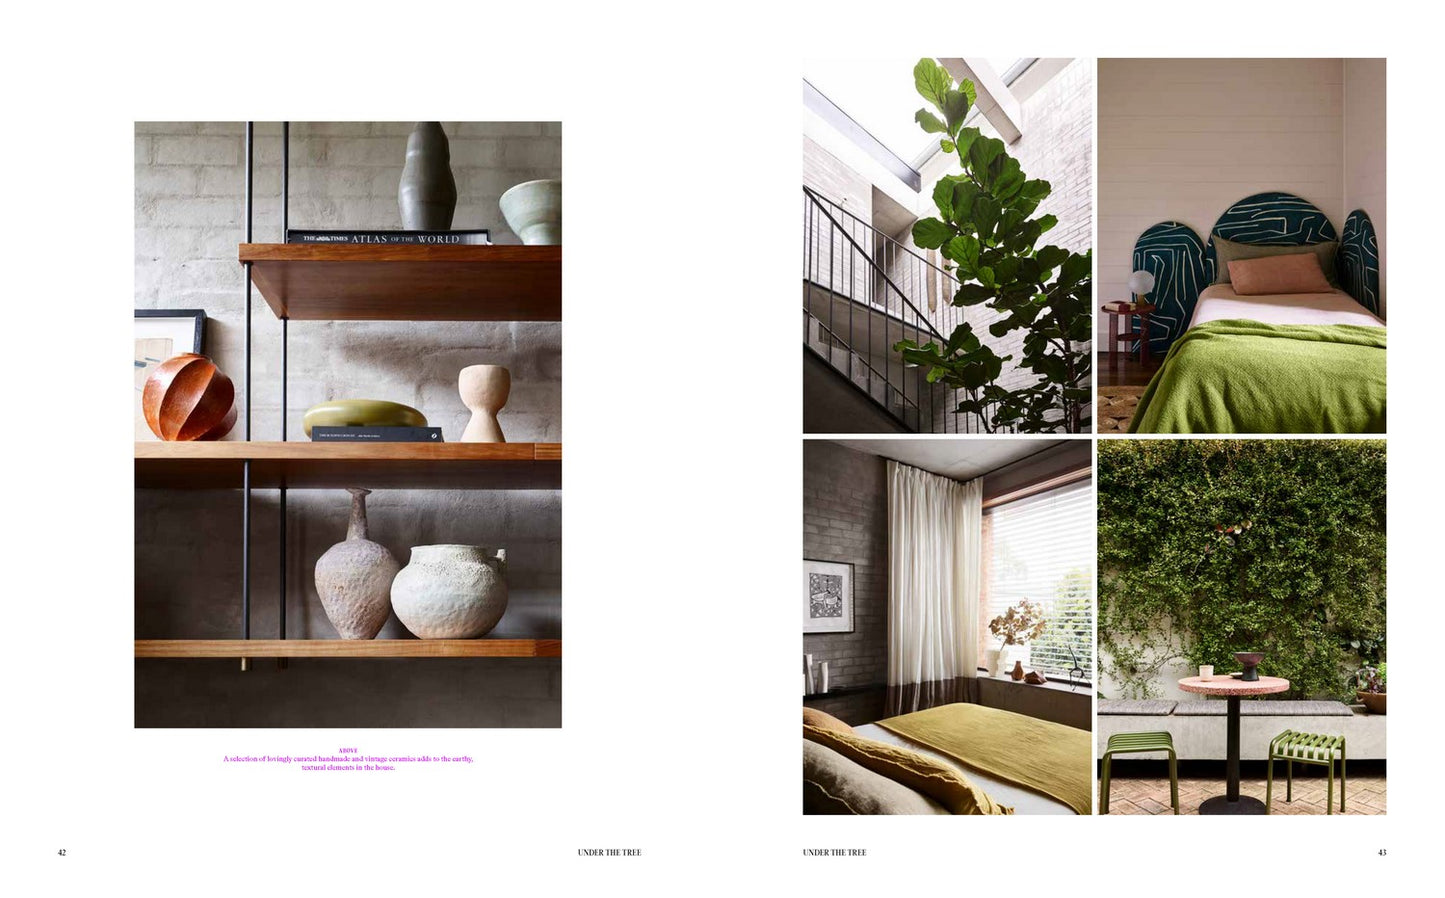 BOOKS & CO - Arent & Pyke Interiors Beyond the Primary Palette Book